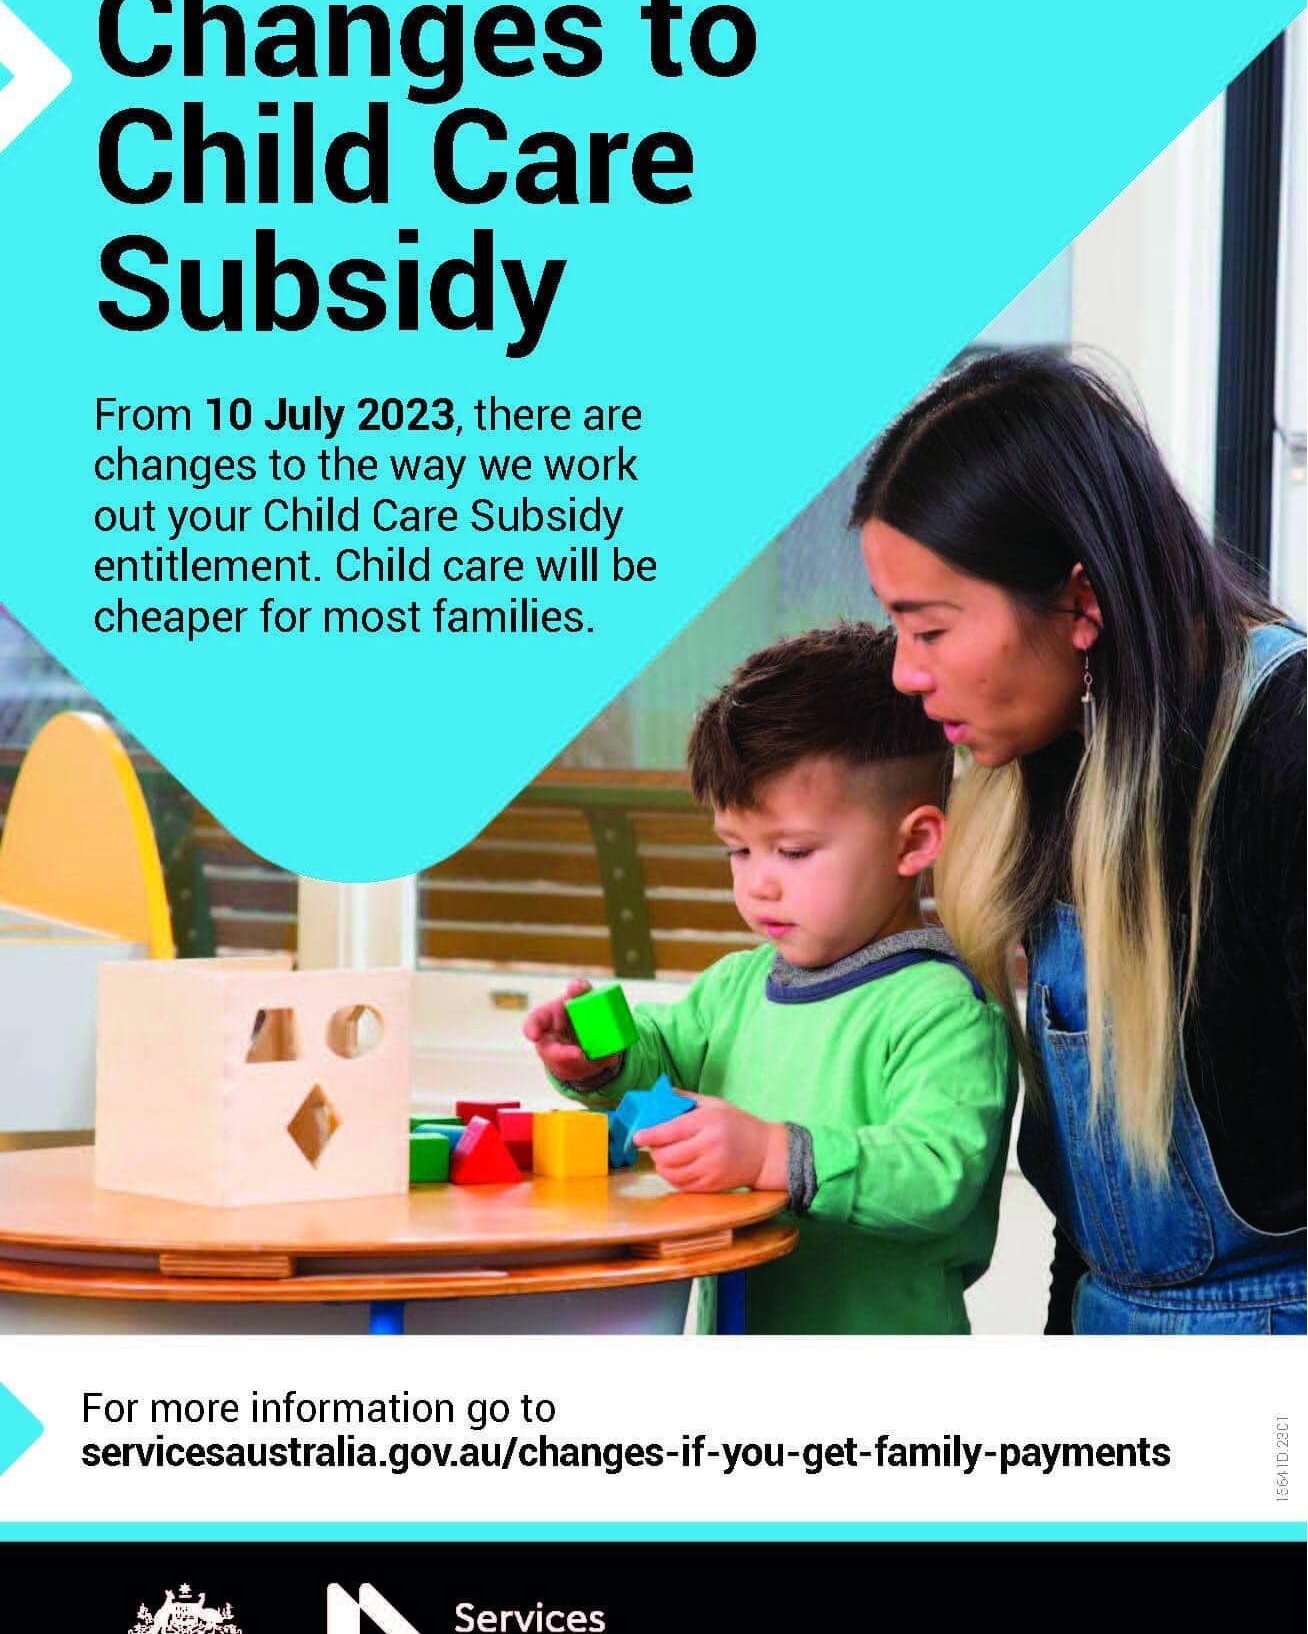 ✨ Child care Subsidy update ✨ 

🌱 From July 2023 most of you using child care will get more CCS. Here&rsquo;s what you need to know:
&bull; The maximum amount of CCS is increasing from 85% to 90%.
&bull; Families earning $80,000 or less will get 90%